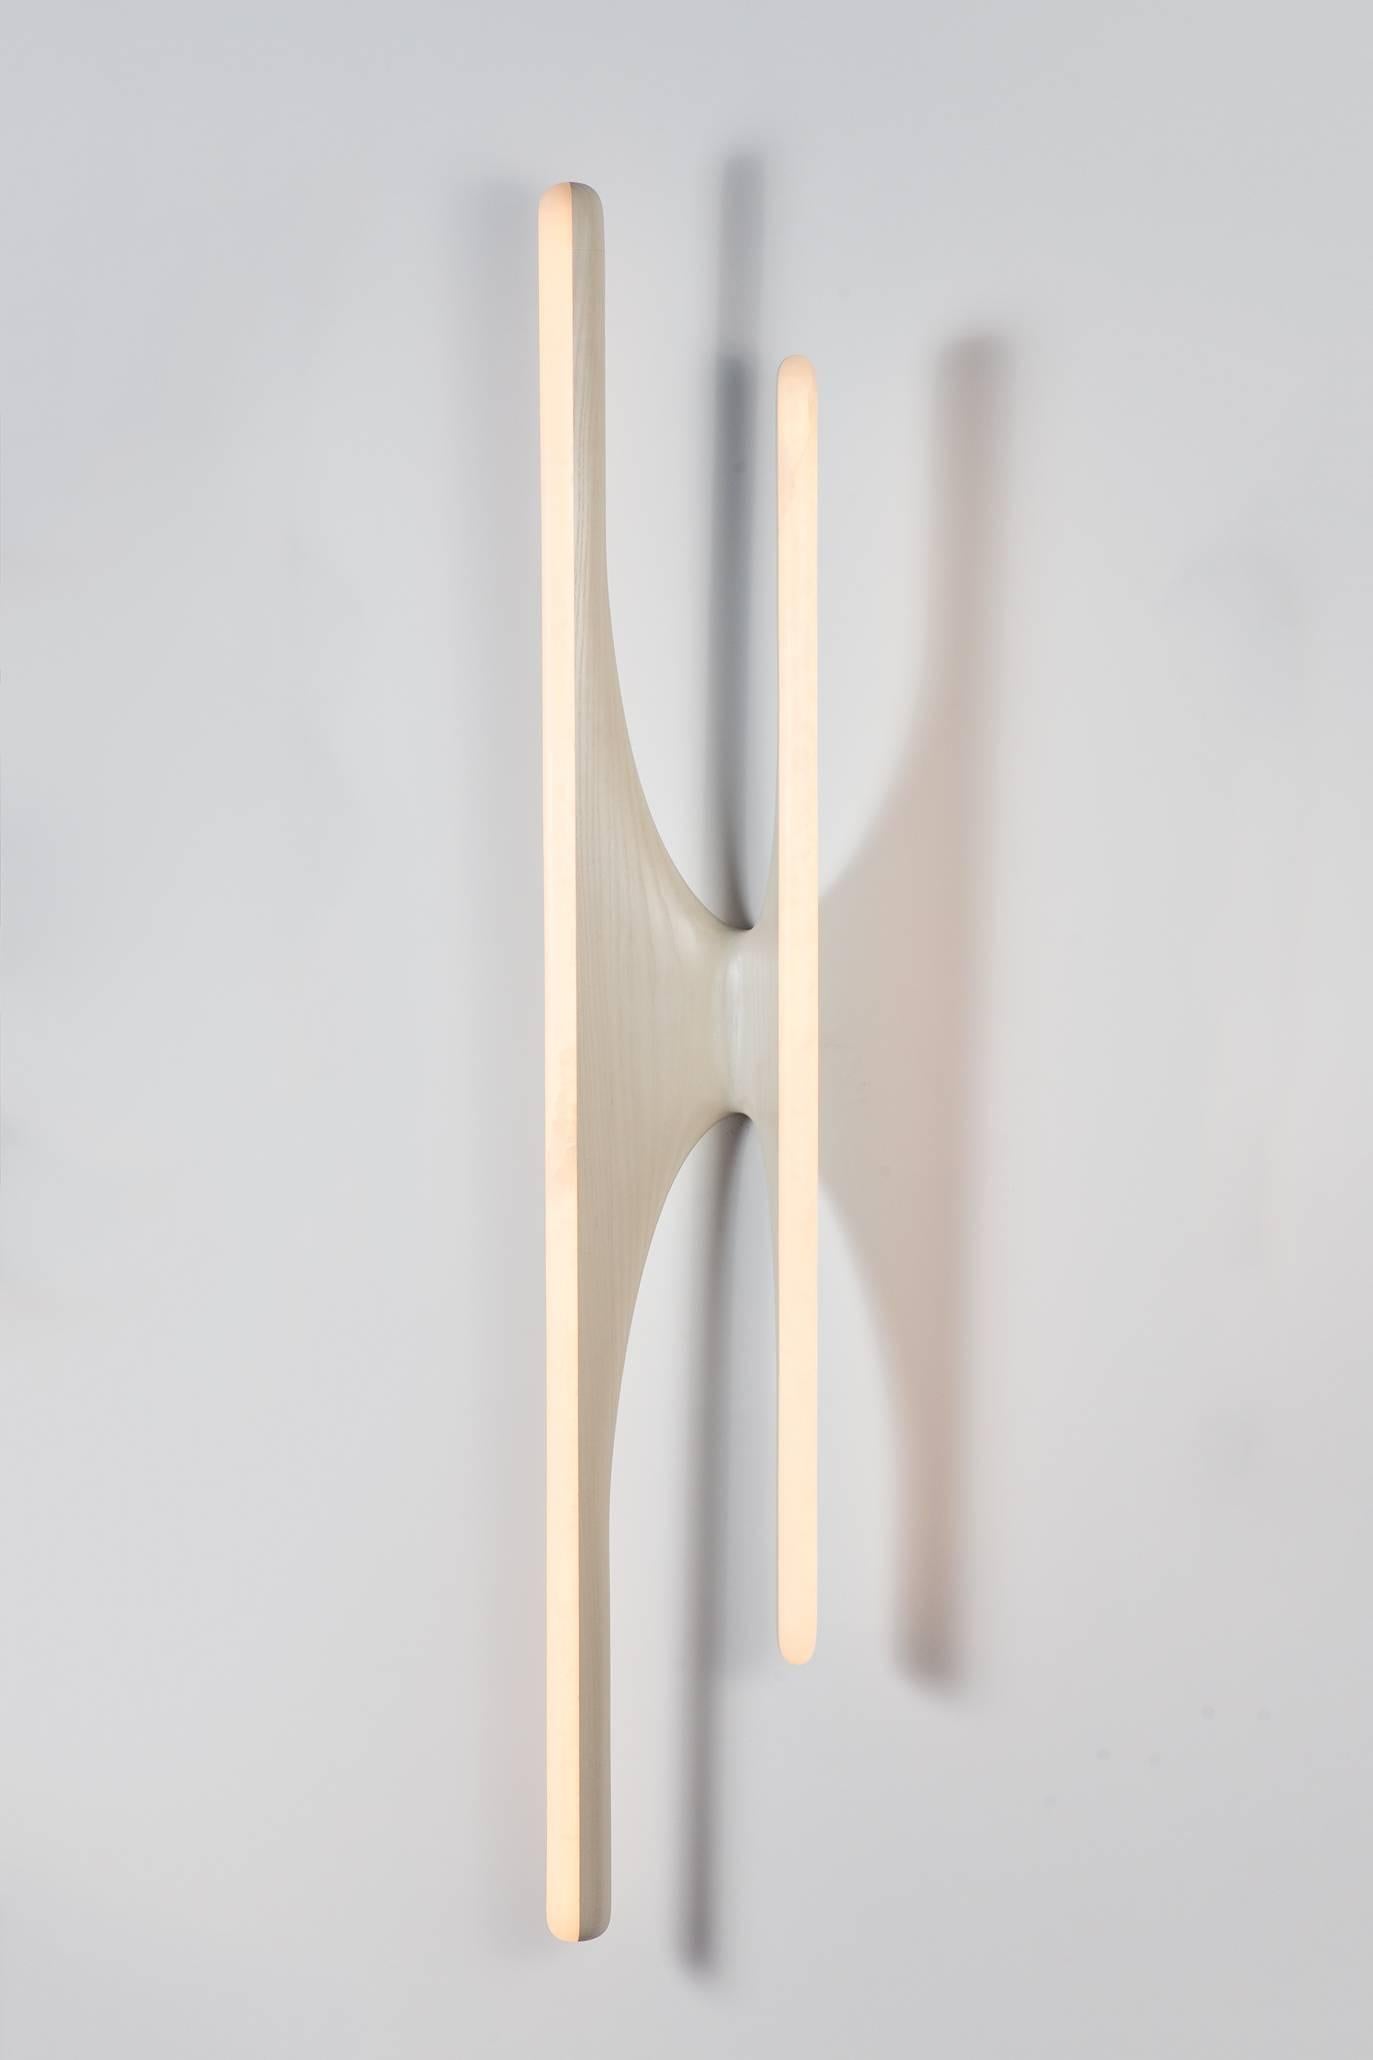 Markus Haase’s unique, hand-sculpted onyx and bleached ash sconce retains a luminescent quality, even when unlit. Its luster and smooth finish renders the piece to appear sealed in its raw state. Powered by the most advanced LED technology, the